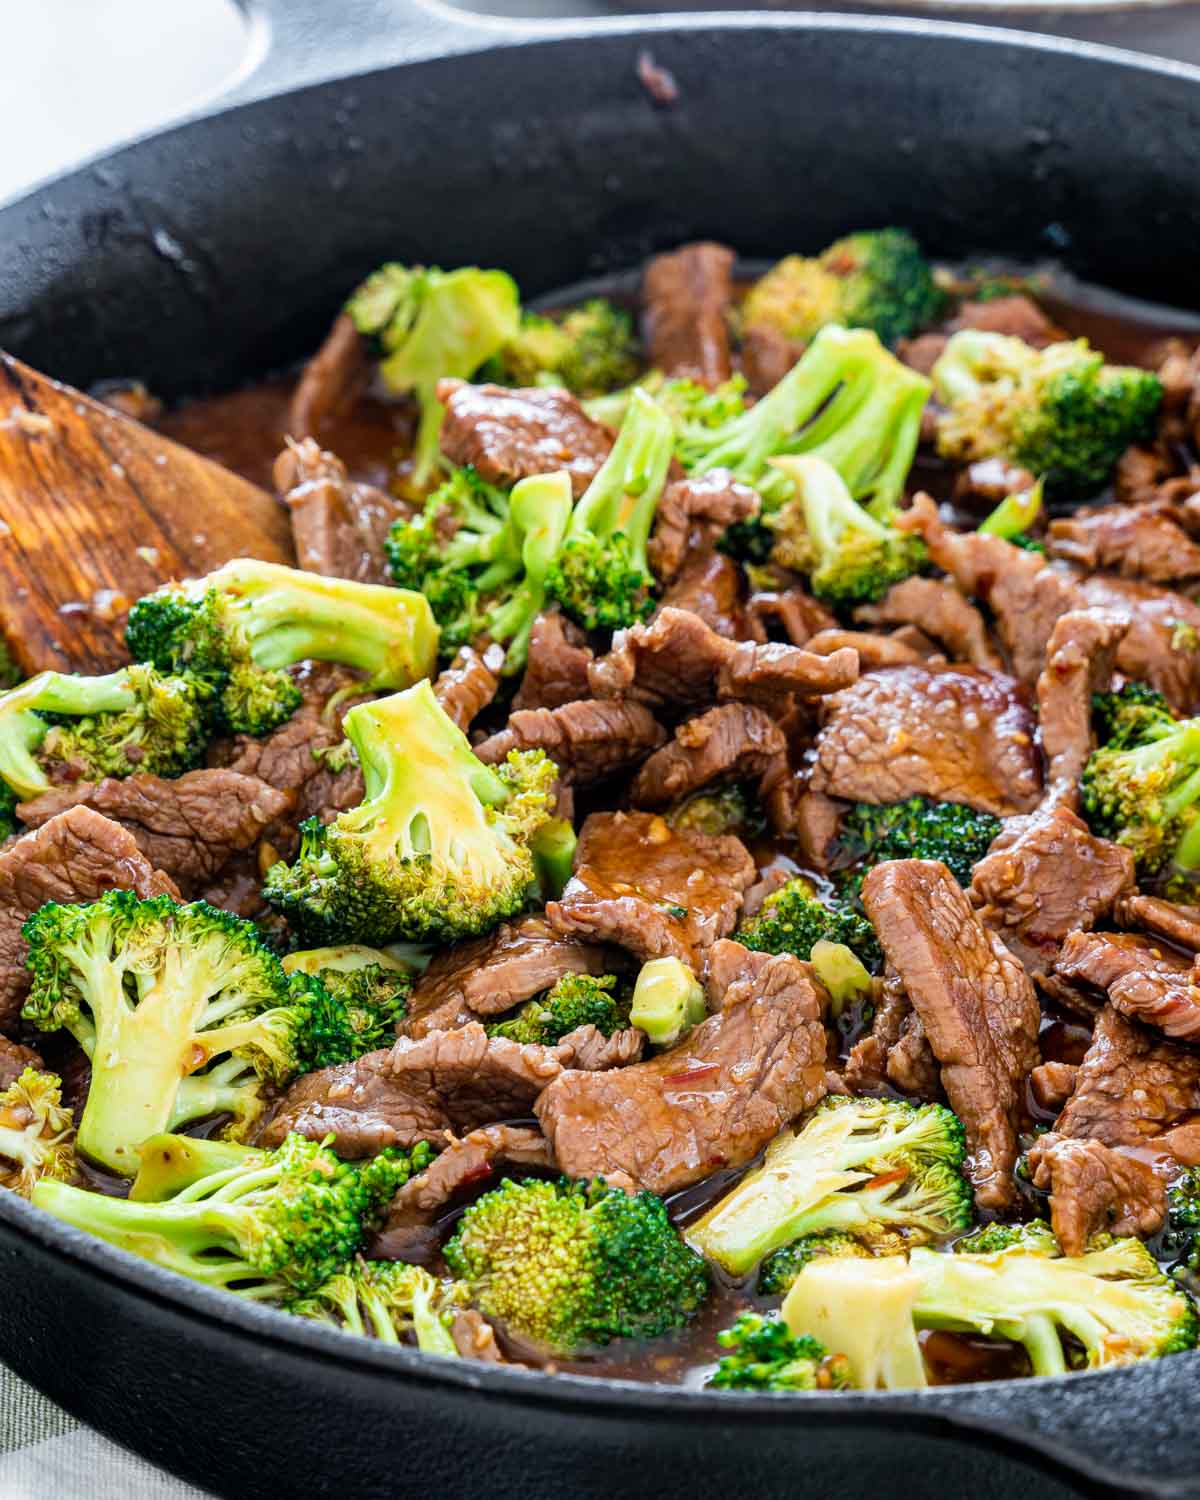 Easy Thai Beef And Broccoli Stir Fry - Beef Poster